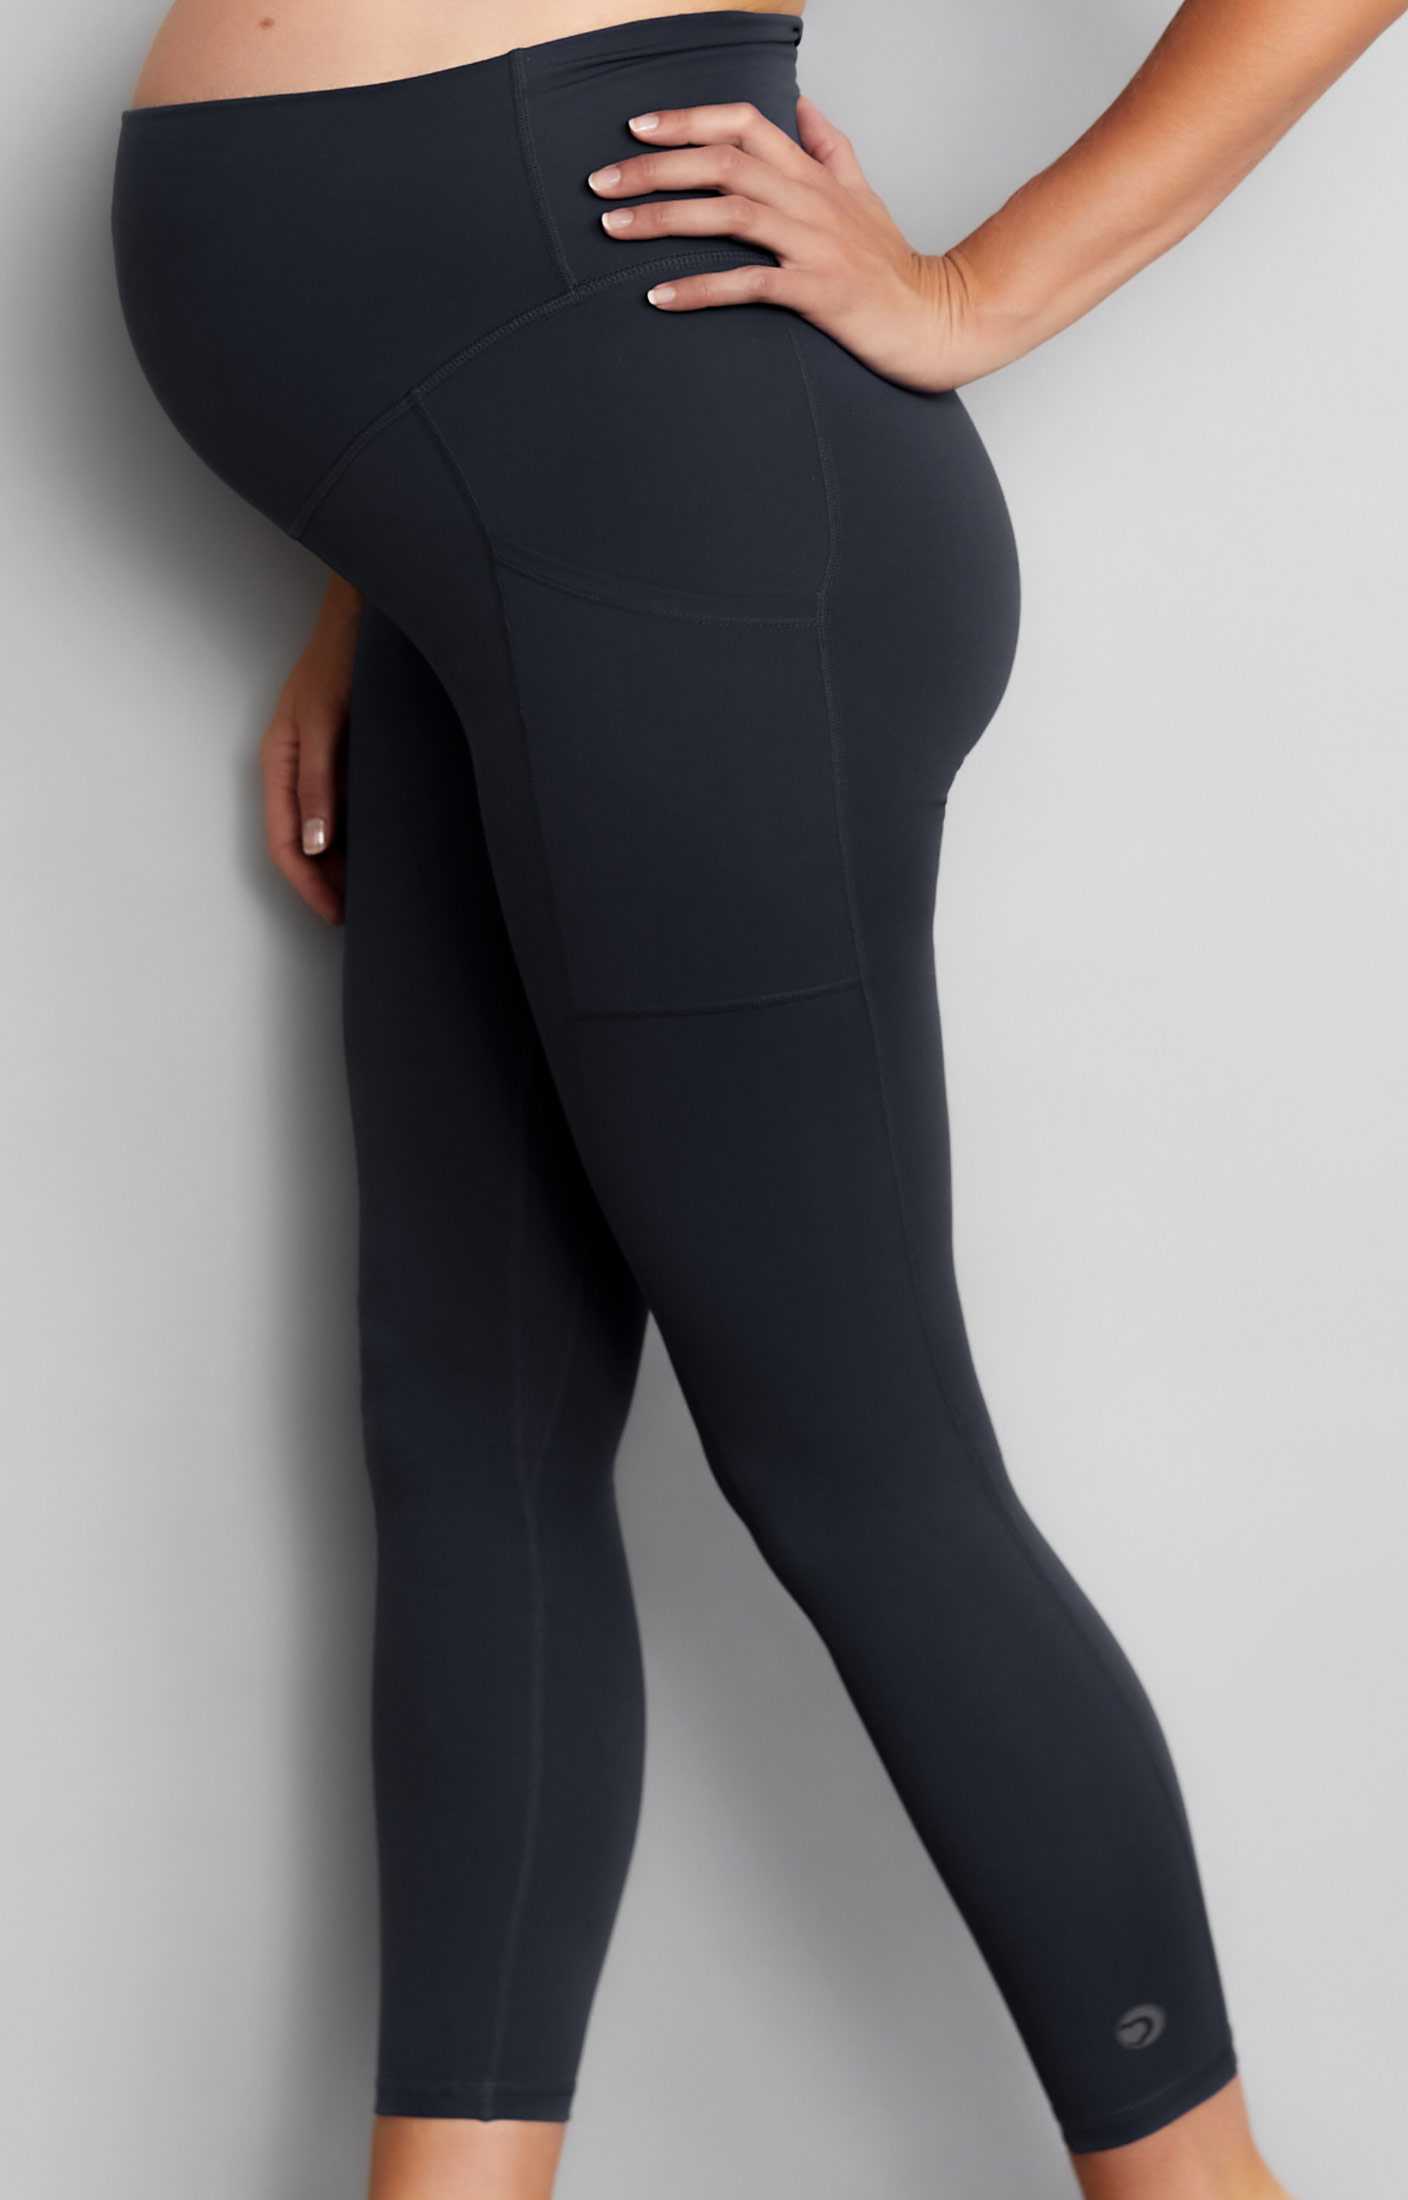 Activewear Luxe Leggings Black - Maternity Wedding Dresses, Evening Wear  and Party Clothes by Tiffany Rose US